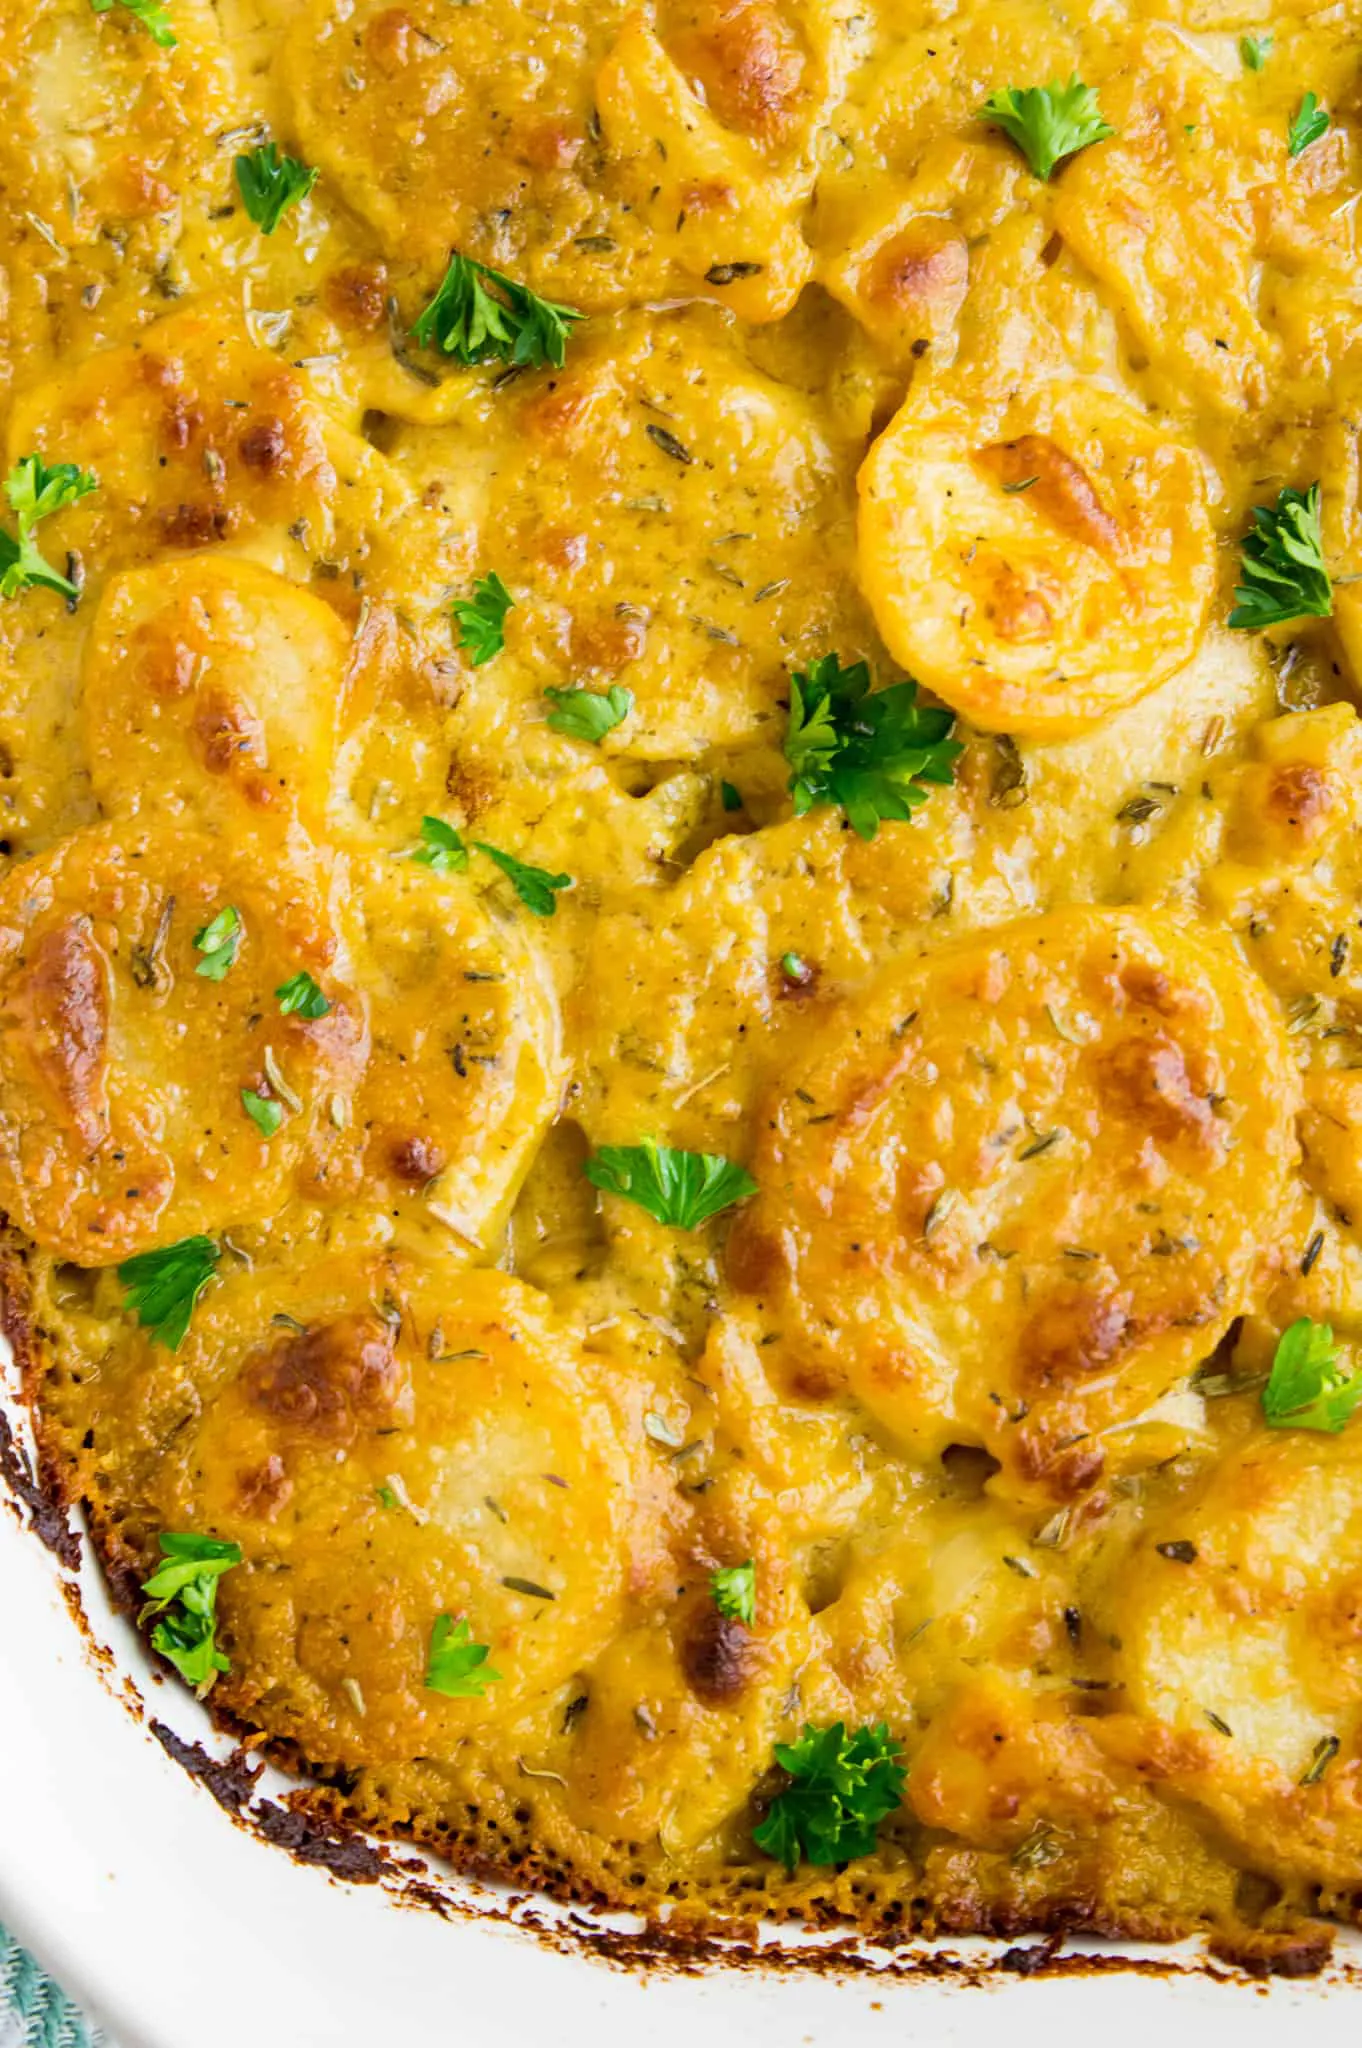 A pan of Whole30 scalloped potatoes garnished with parsley